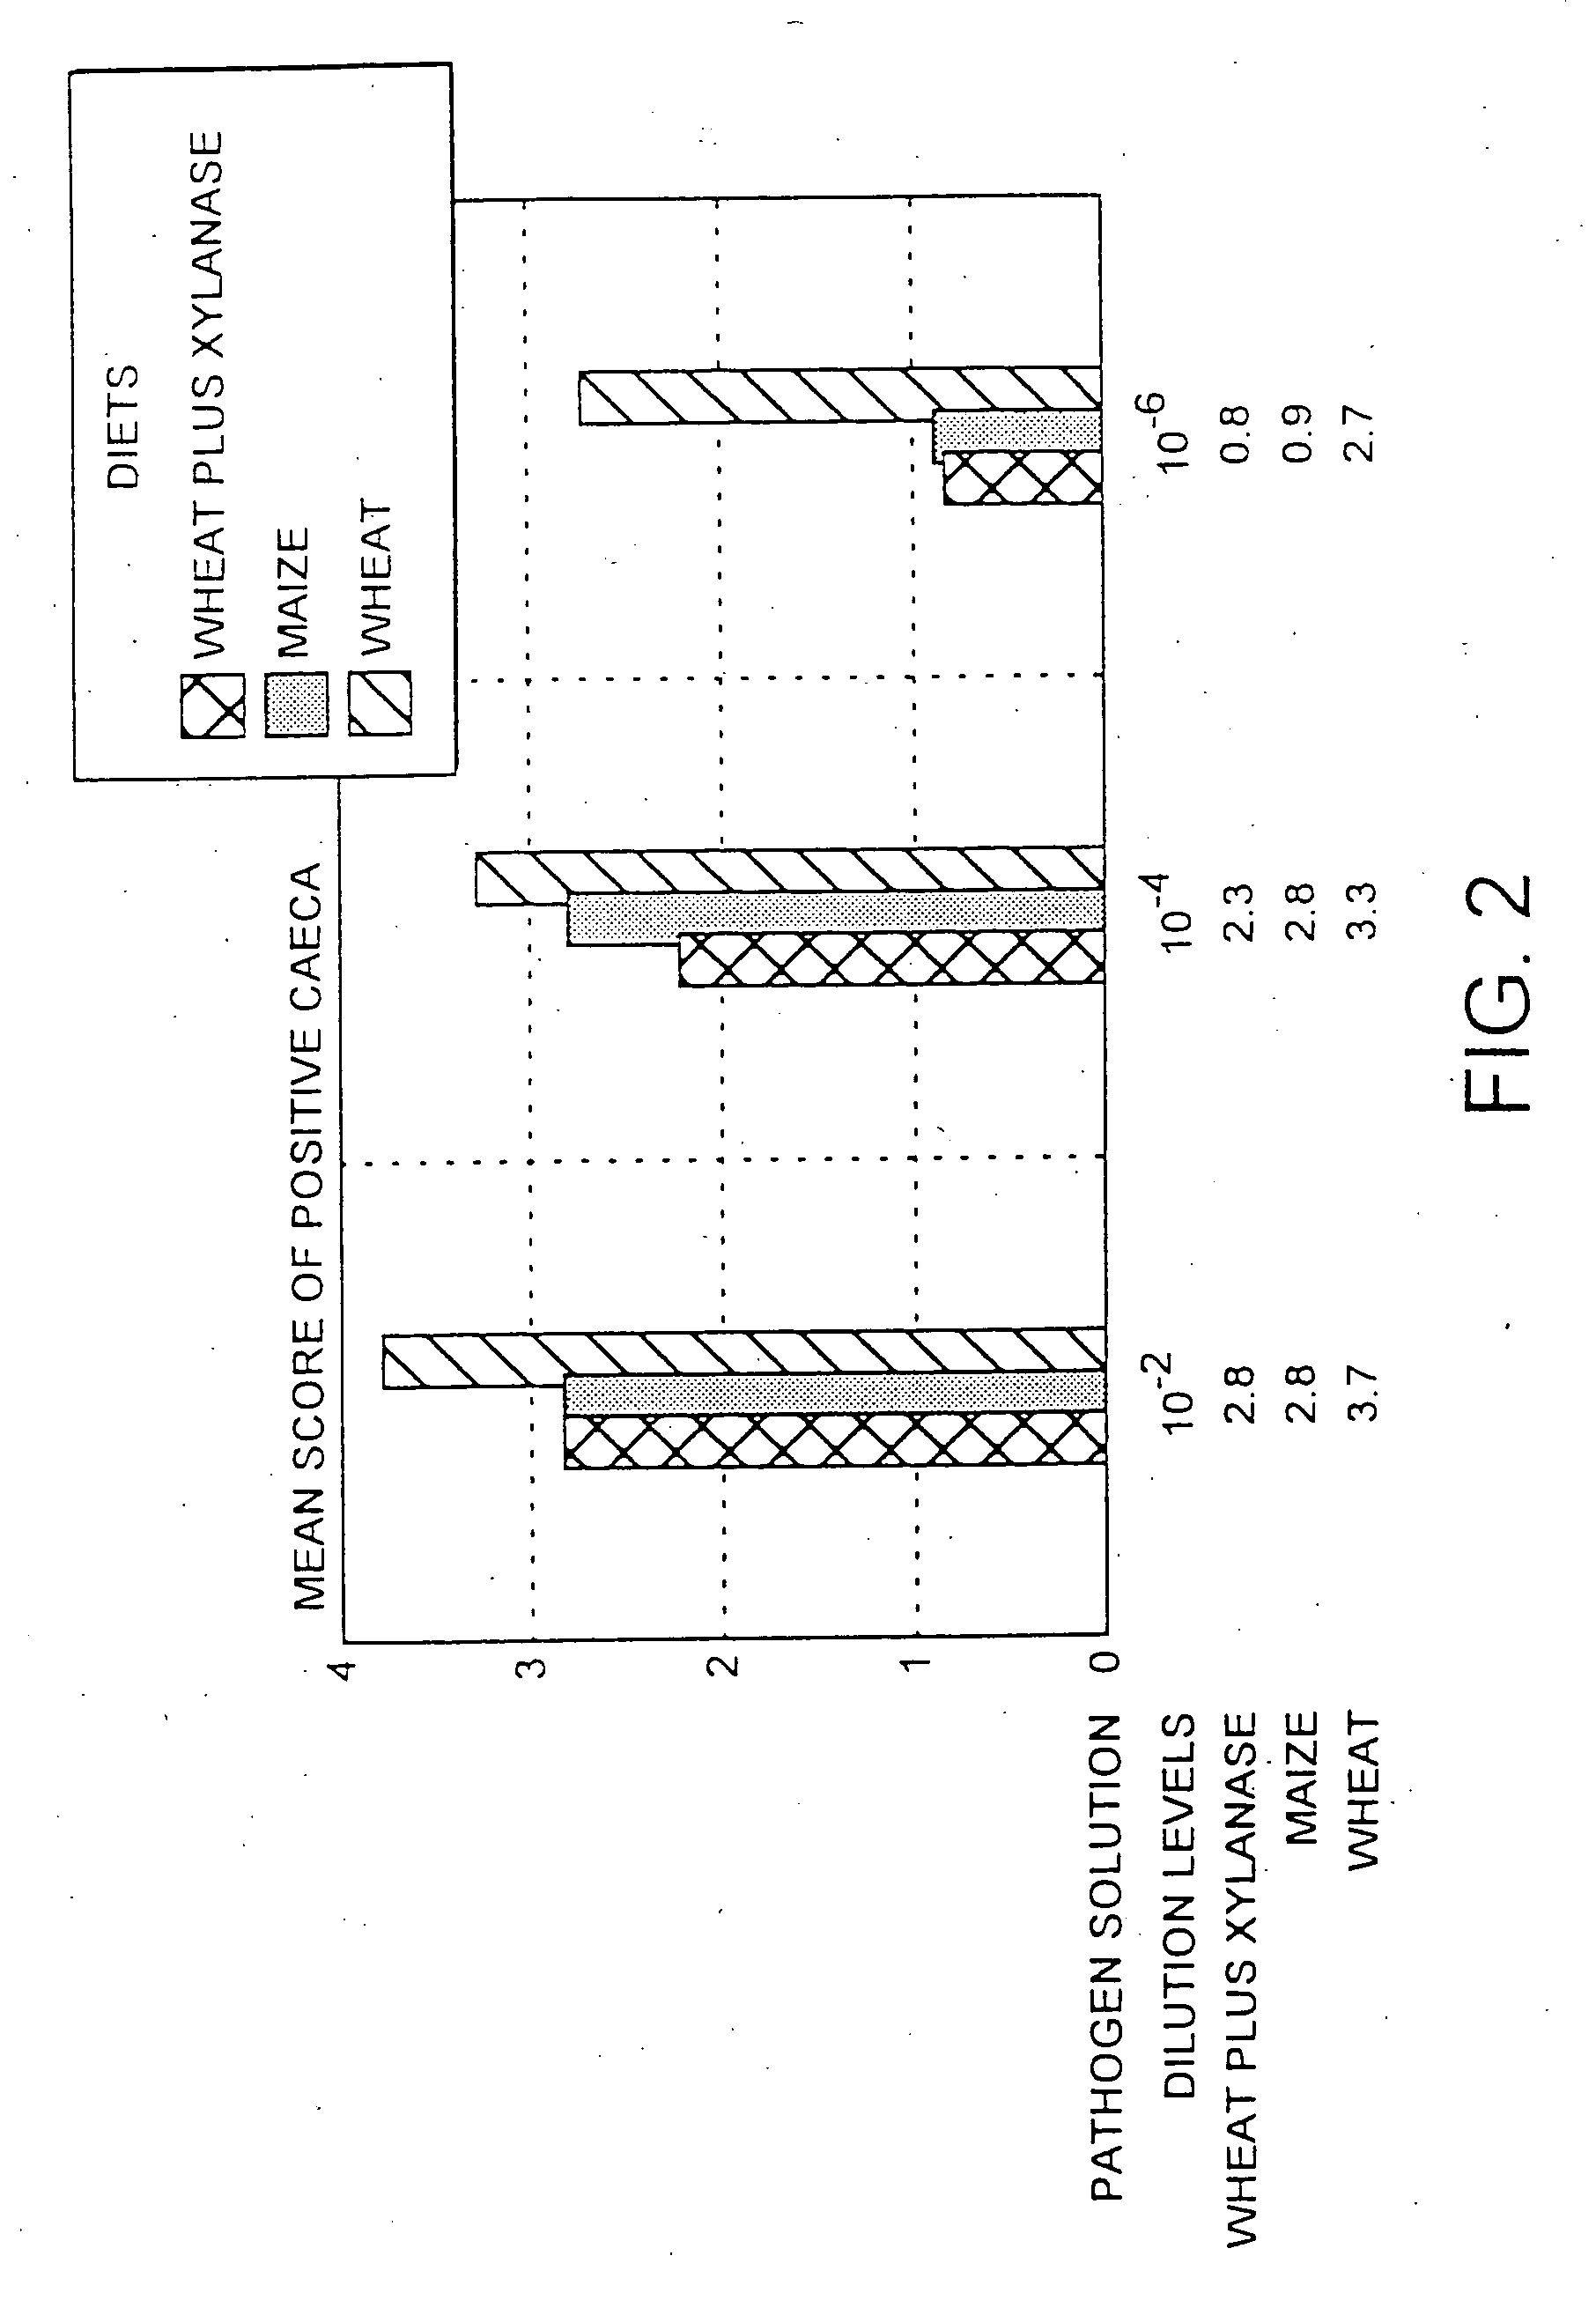 Use of an enzyme for the manufacture of an agent for controlling bacterial infection